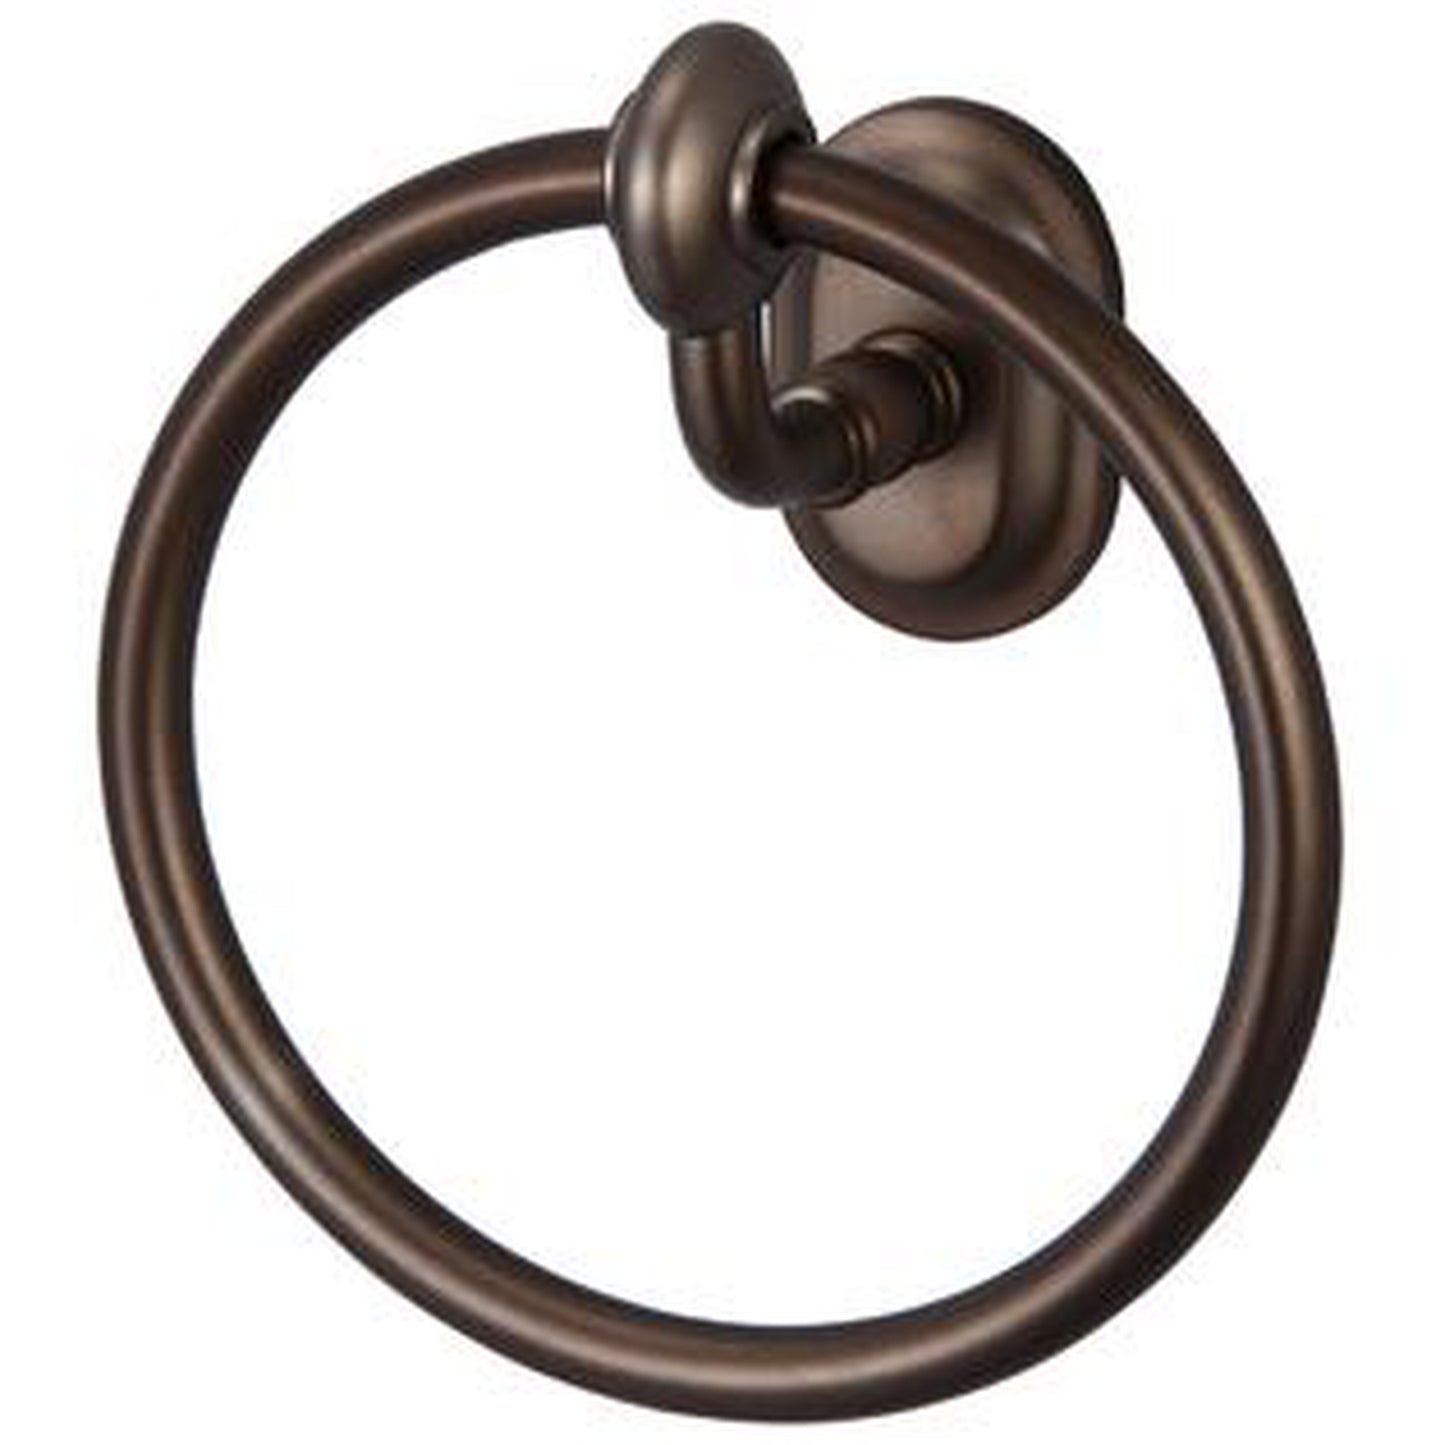 Water Creation Elegant Matching Glass Series Towel Ring in Oil-rubbed Bronze Finish